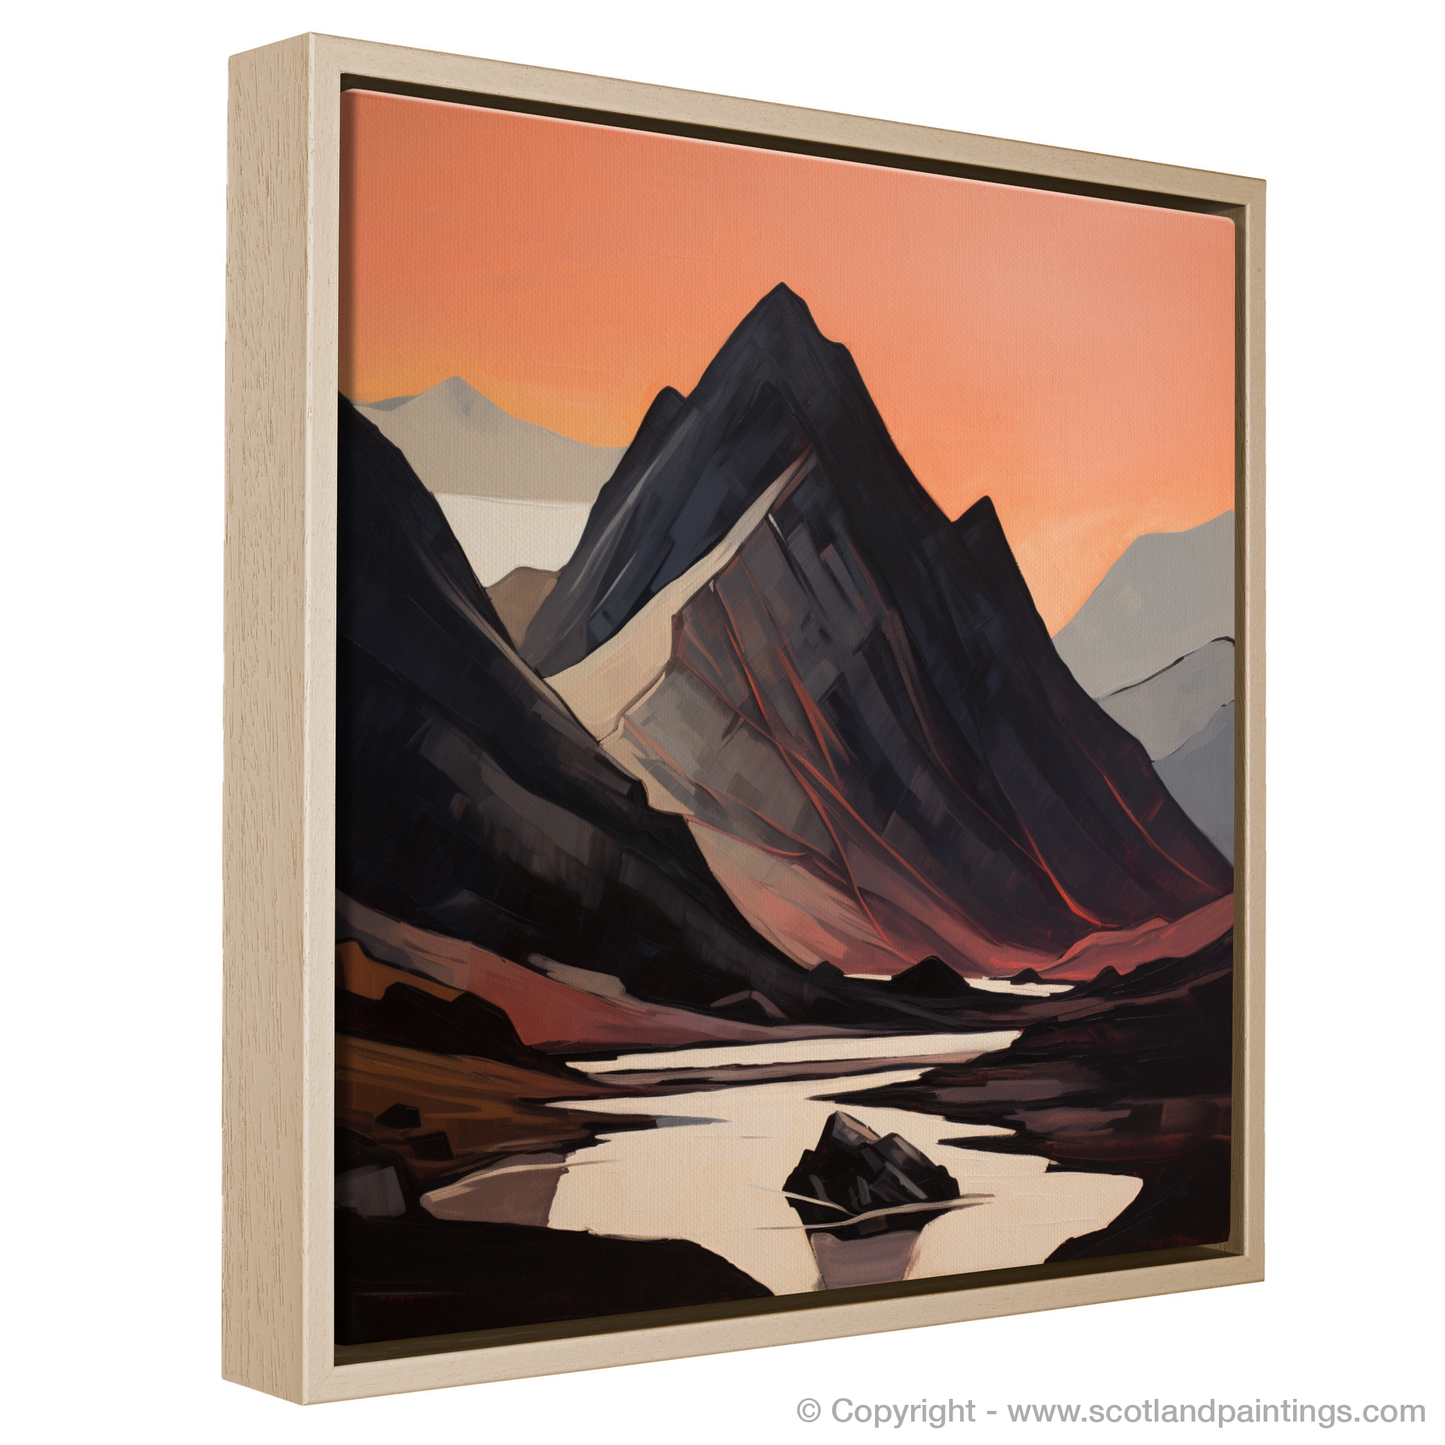 Painting and Art Print of Silhouetted peaks in Glencoe entitled "Silhouetted Peaks at Dusk: An Expressionist Tribute to Glencoe".